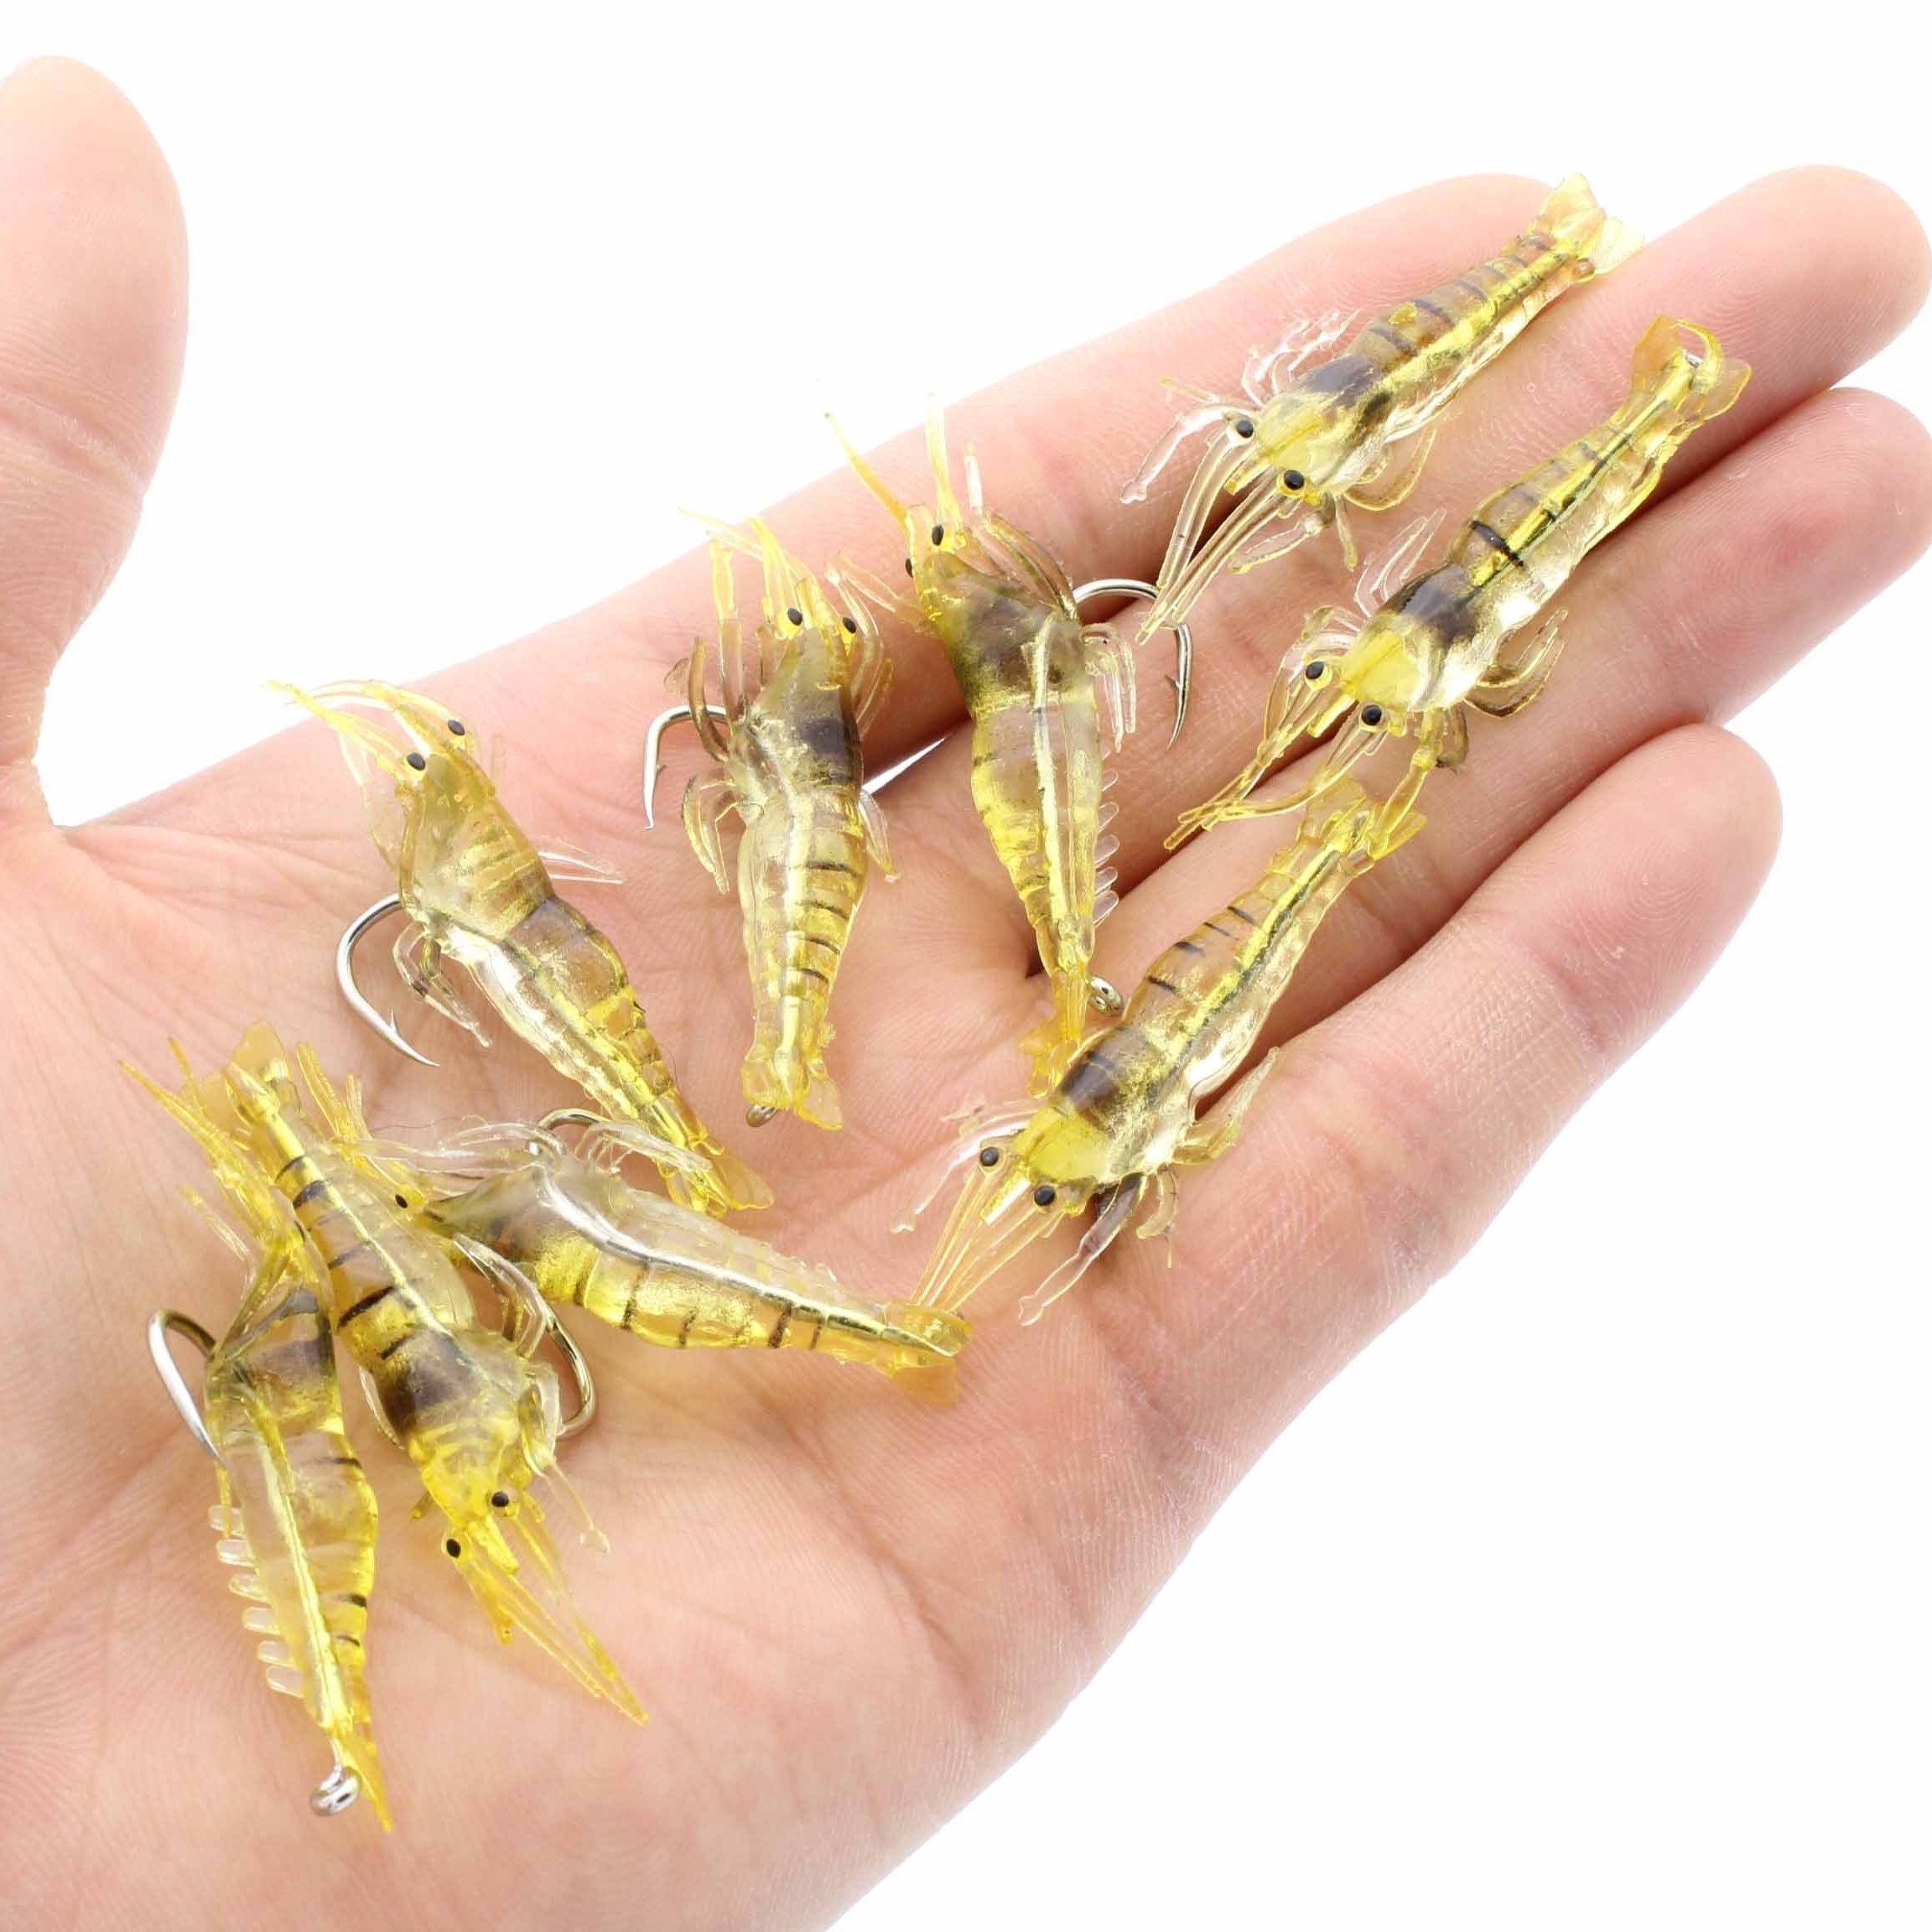 5pcs/box Premium Shrimp Soft Lures for Freshwater and Saltwater Fishing -  Durable Hooks for Bass, Trout, and Crappie